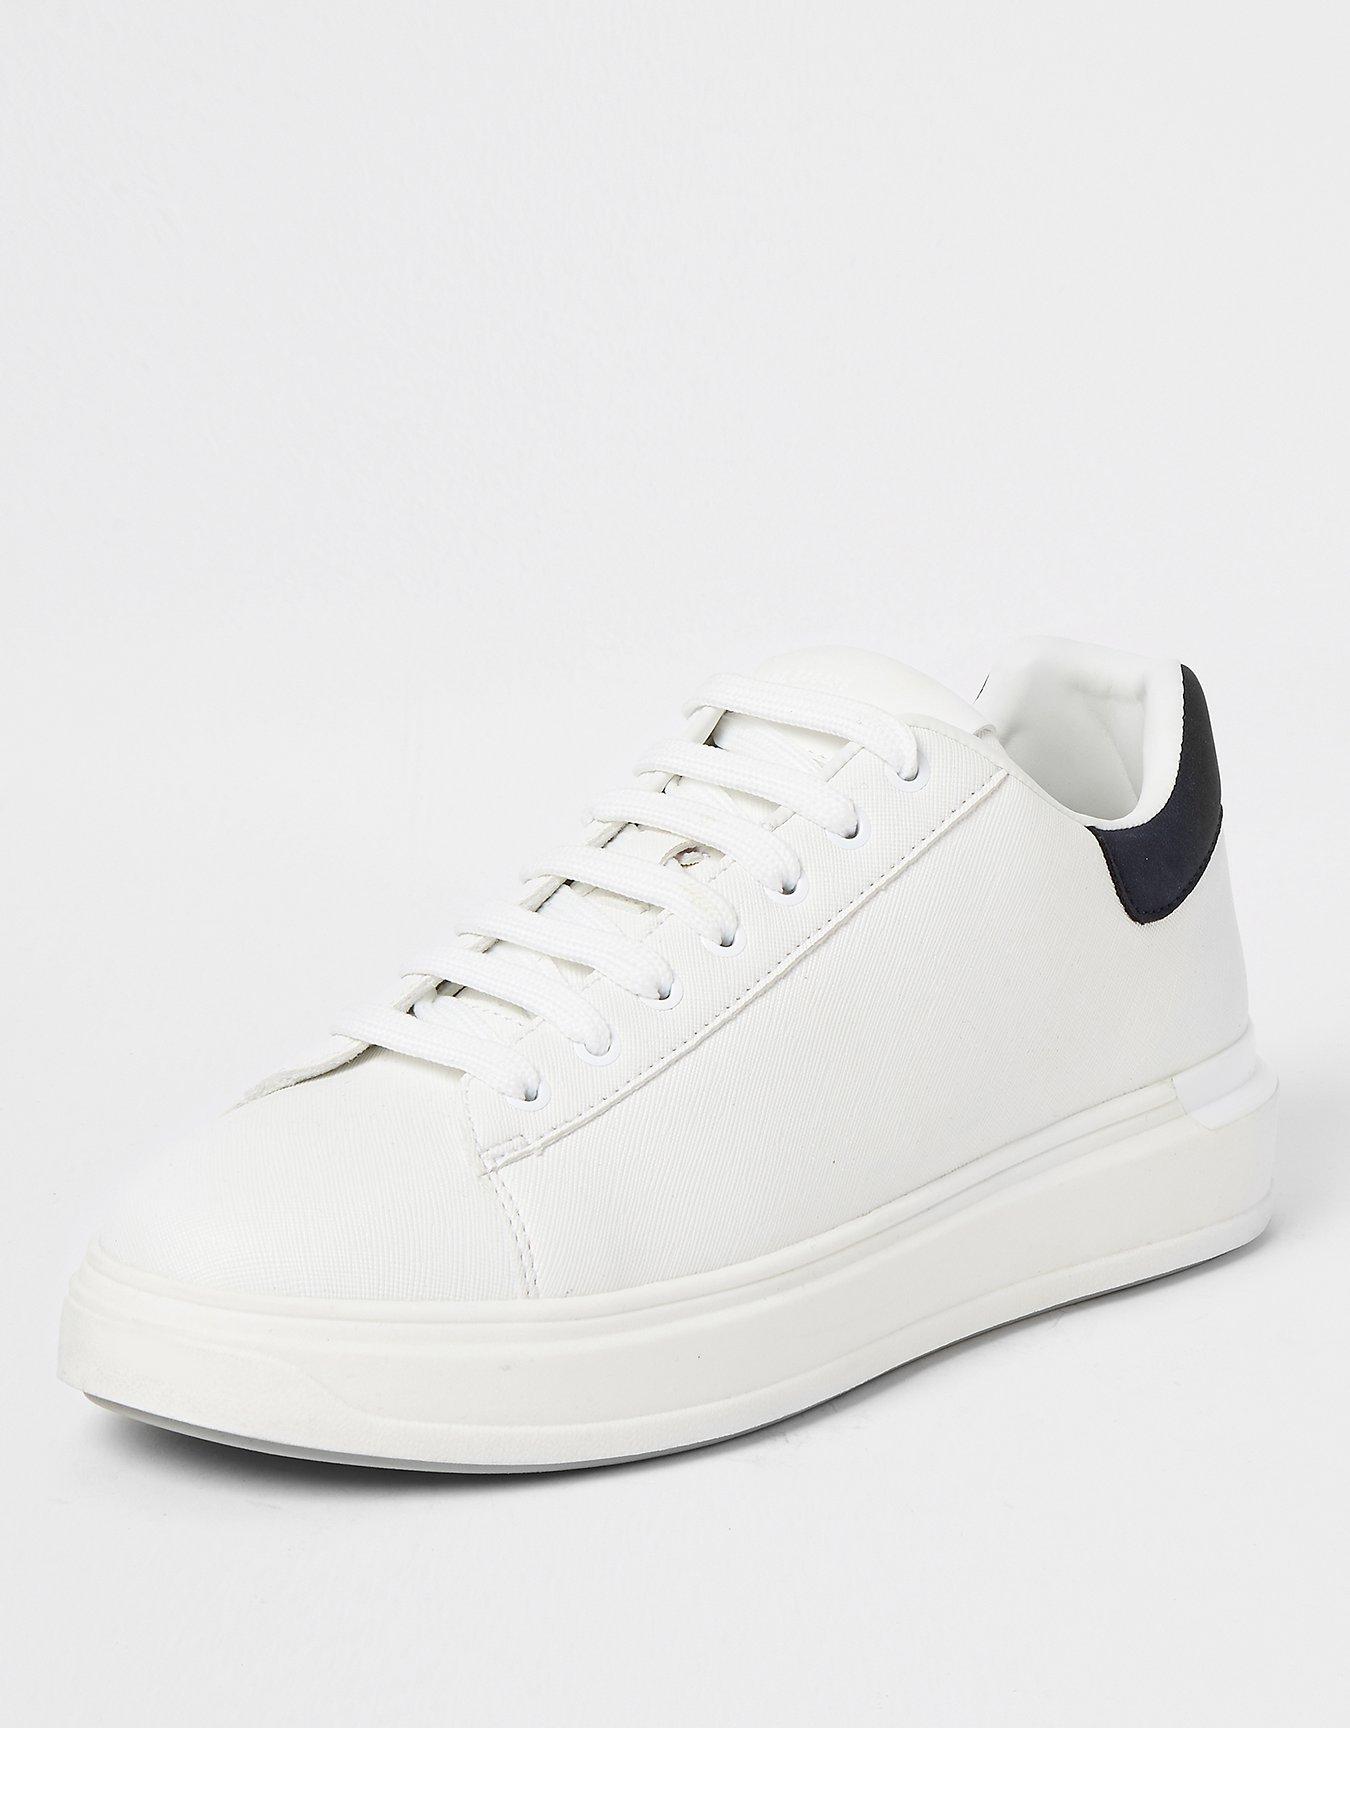 river island mens trainers sale